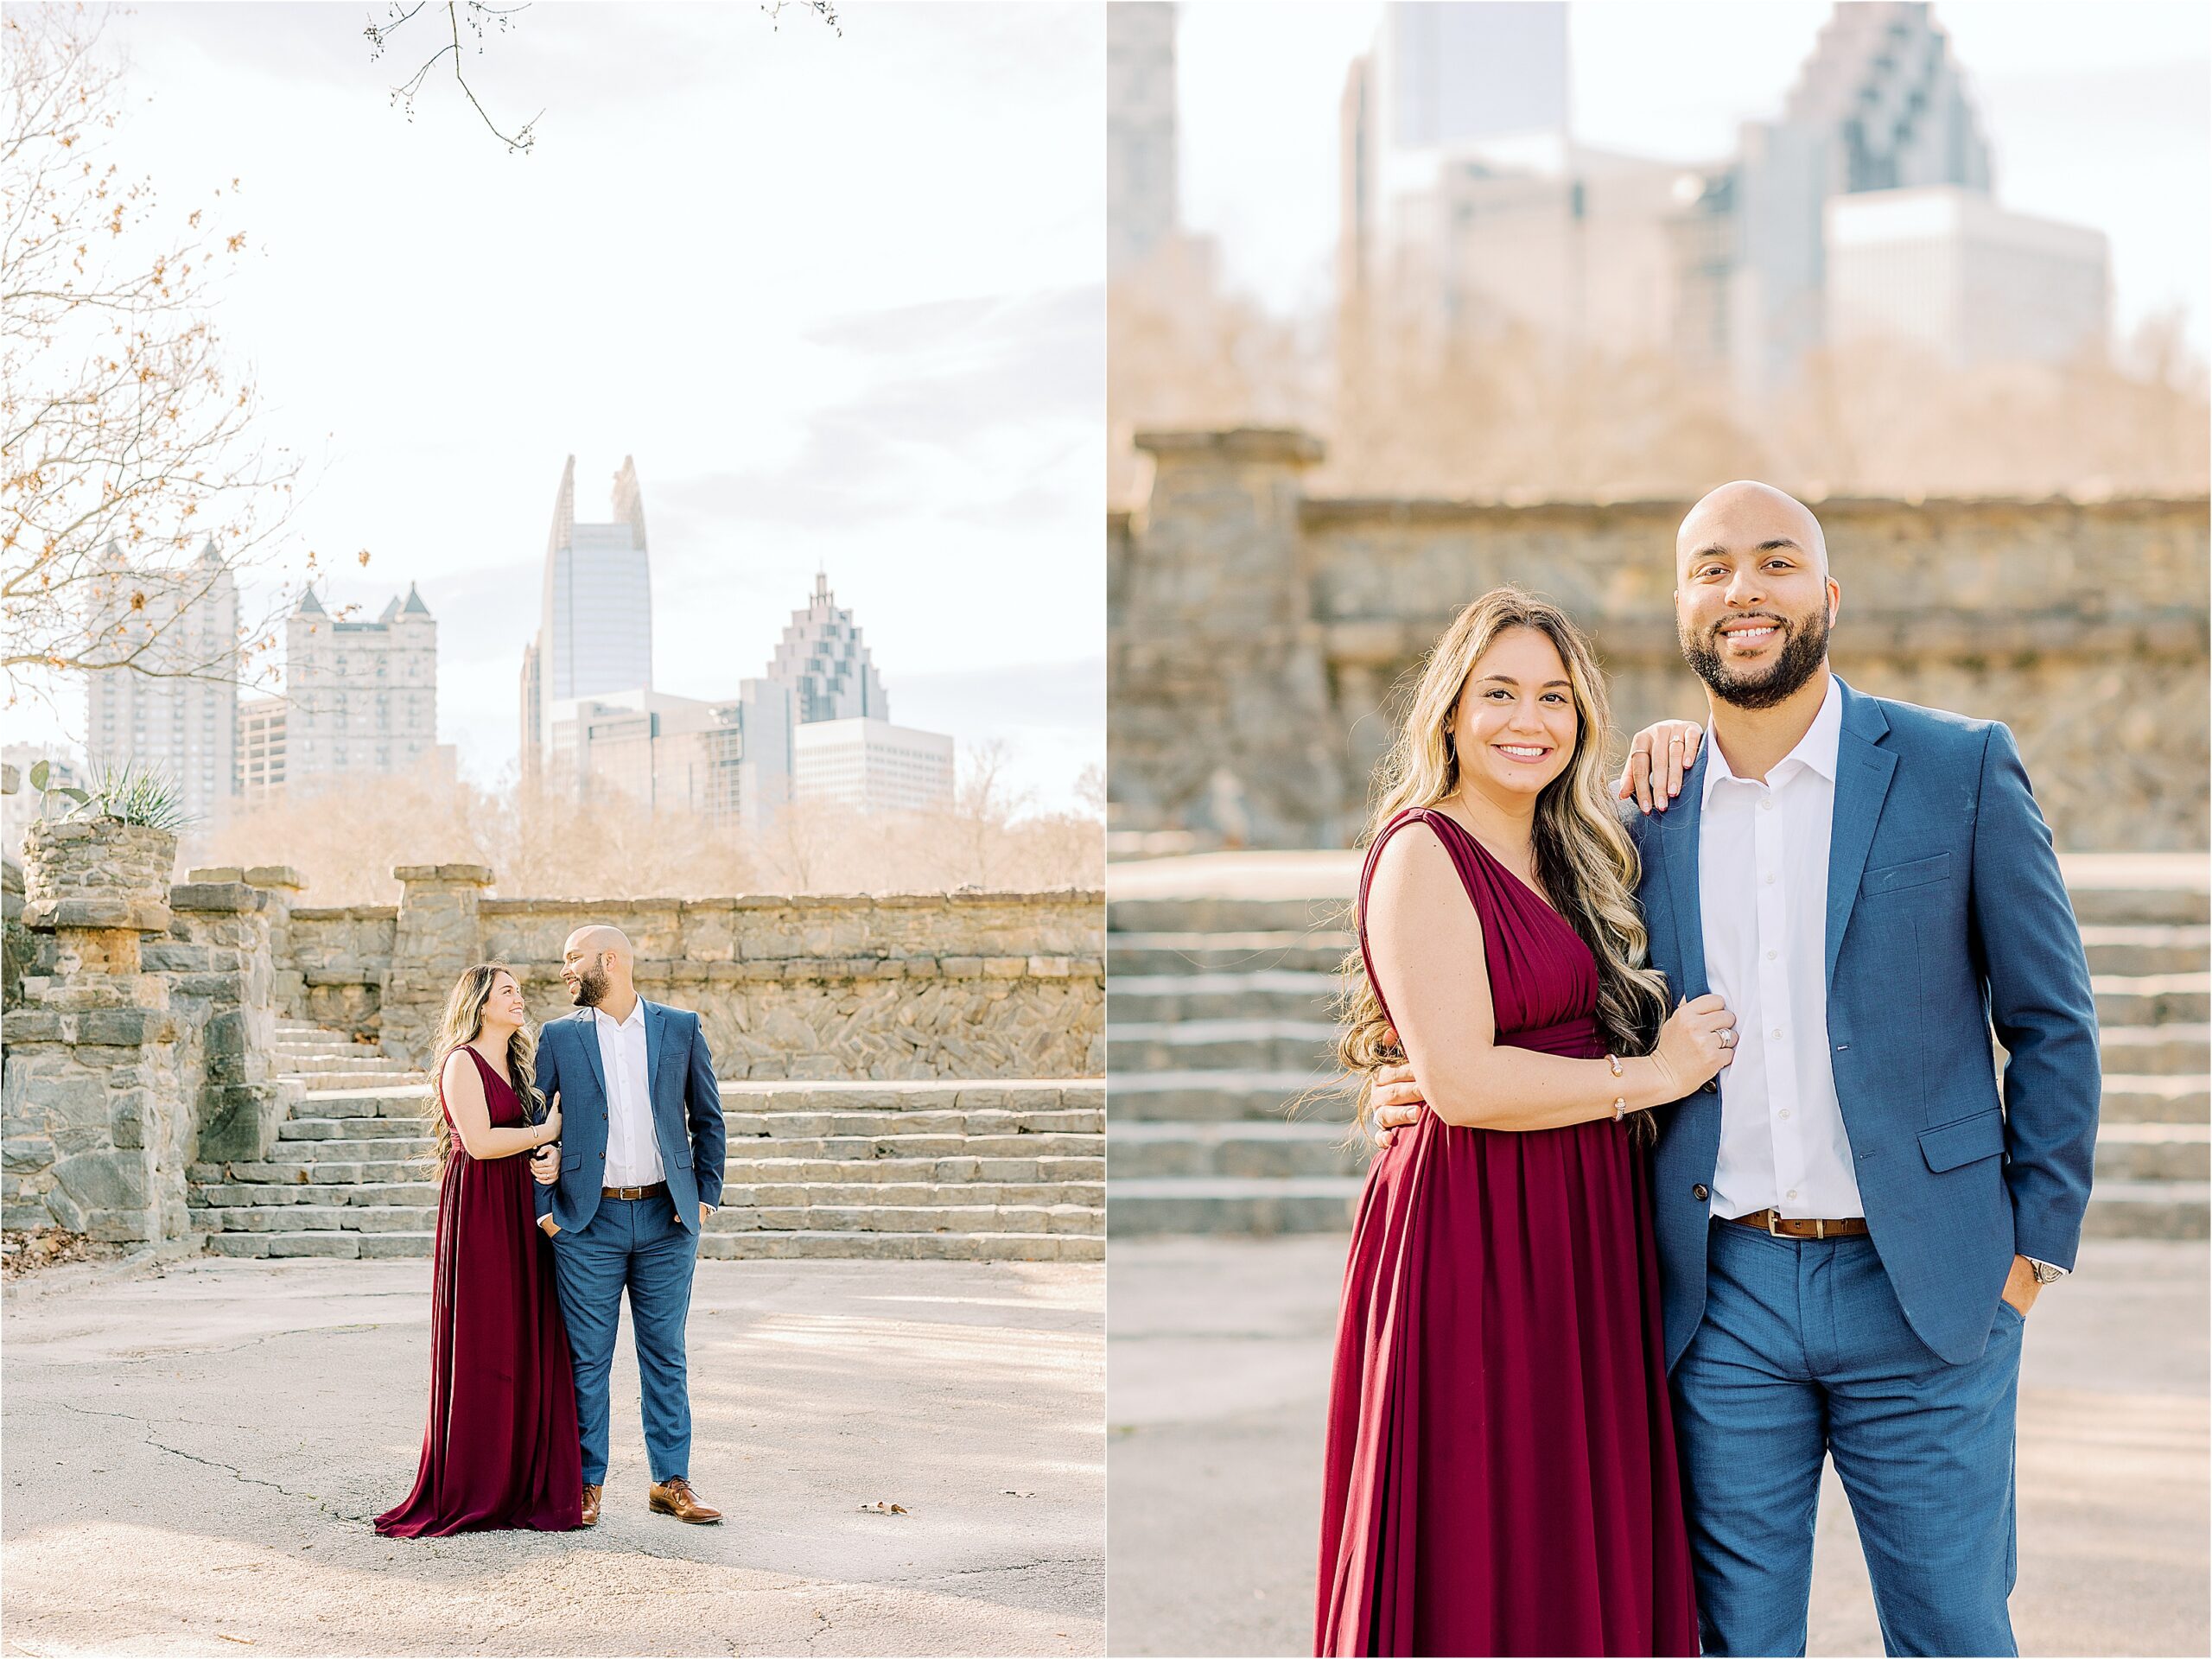 couple in piedmont park, Atlanta GA, wearing a red dress and a blue suit with a stone wall background